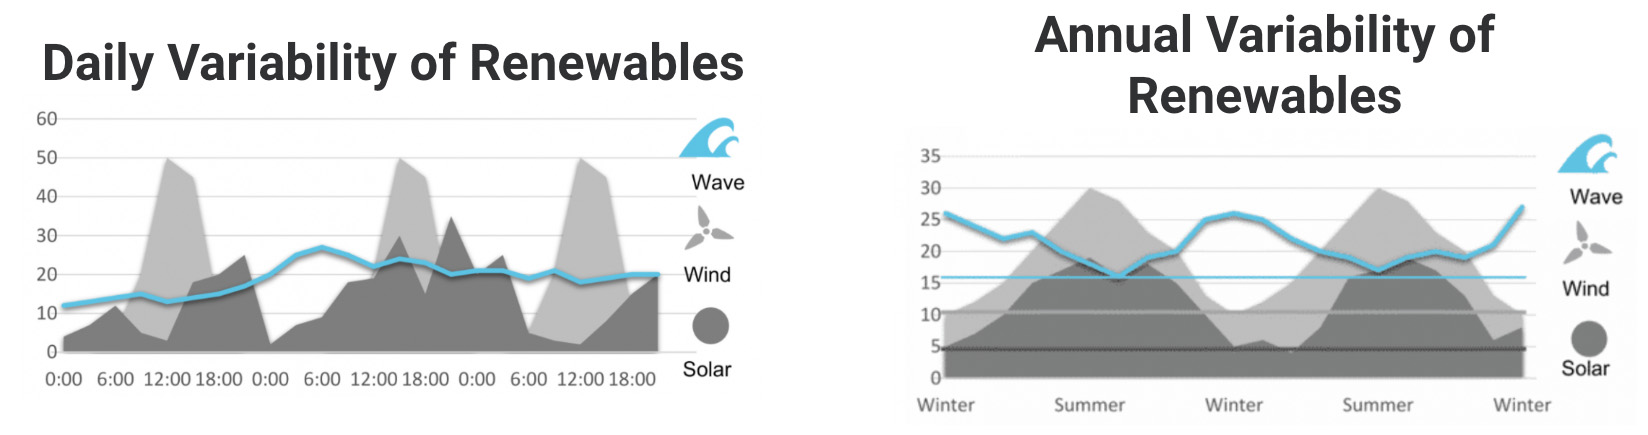 2 line charts. The left chart compares the daily, and the right chart the annual, variability of wind, solar and wave energy, showing that wave energy is least variable. 